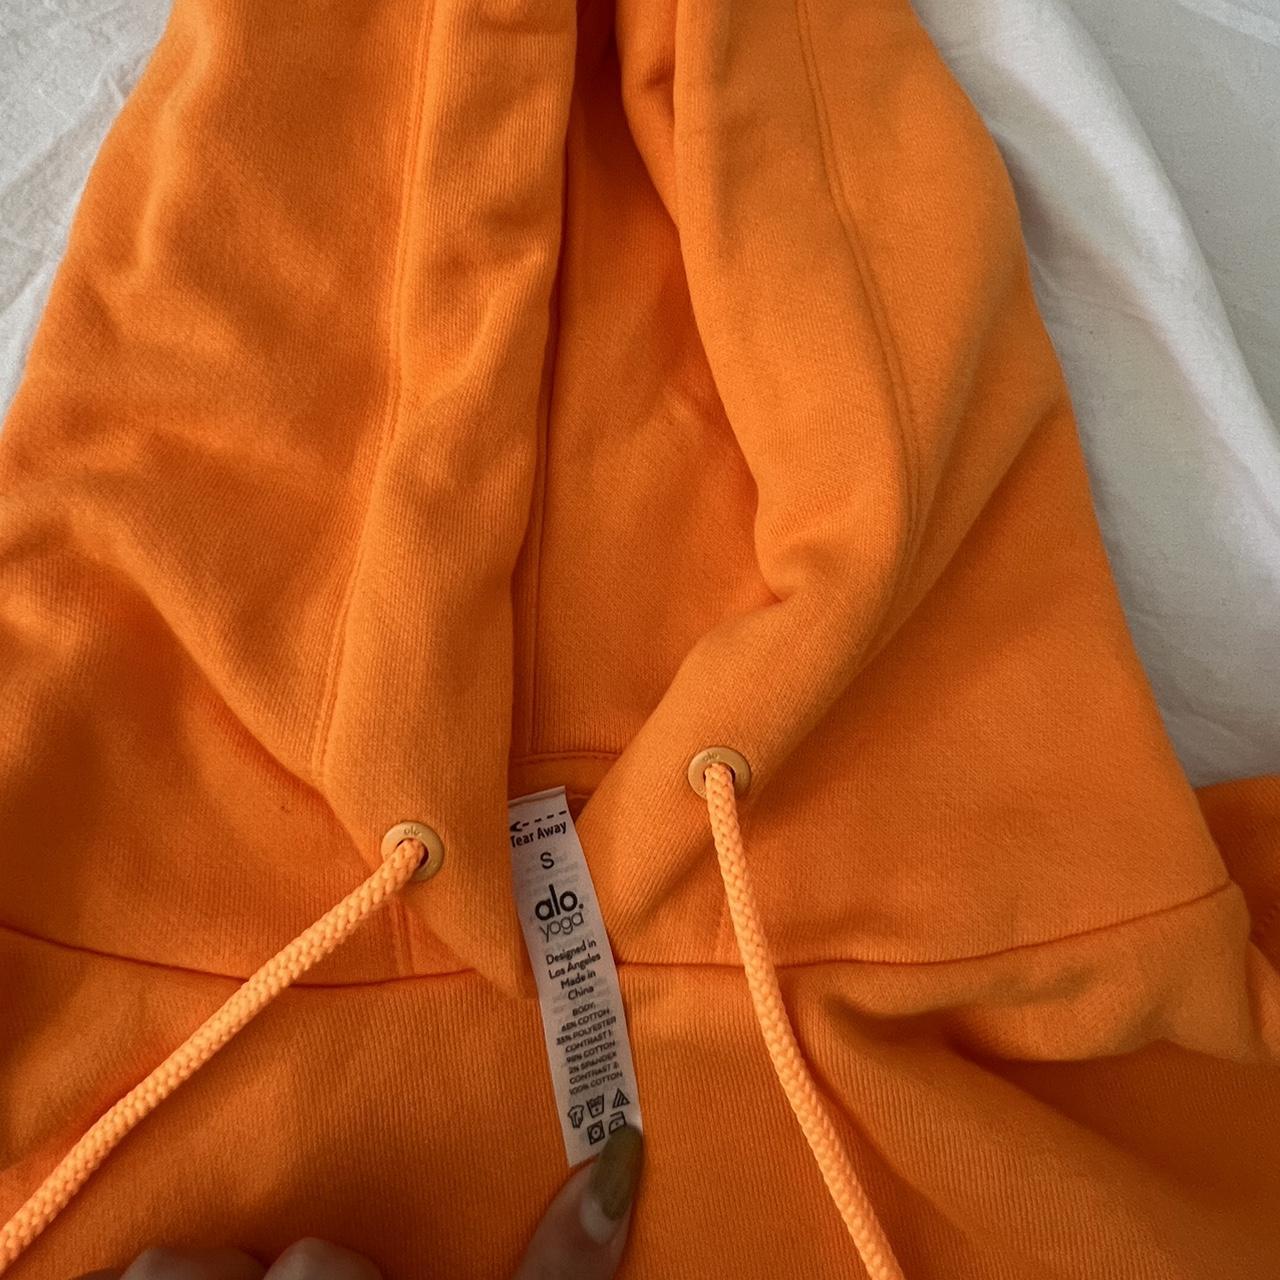 alo yoga bae hoodie size small good condition - Depop